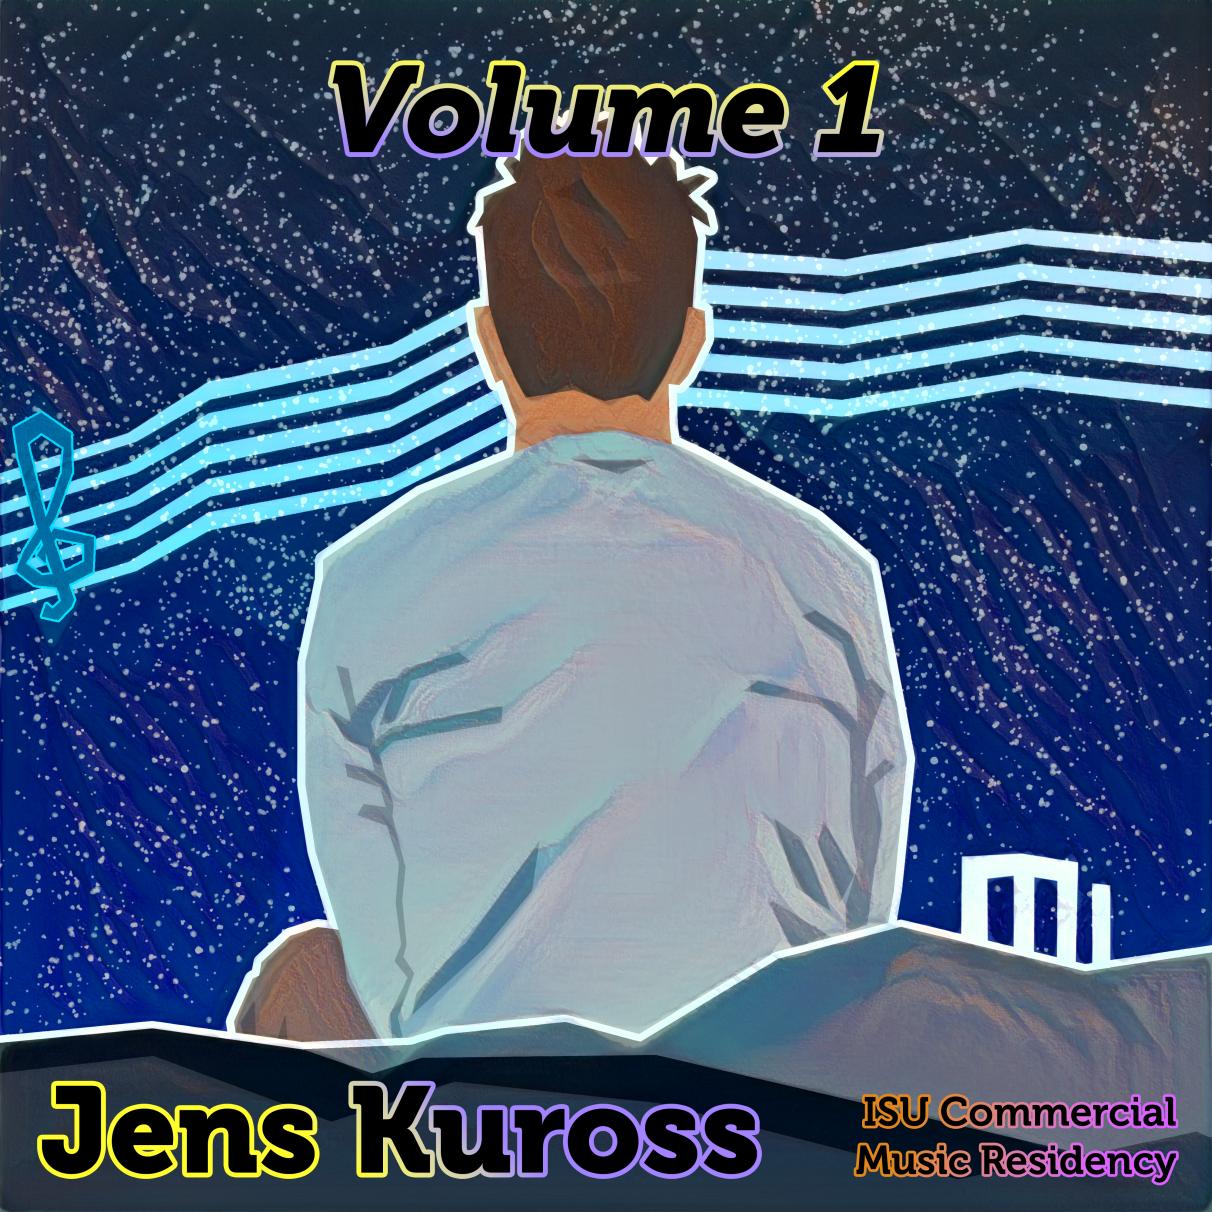 Album Cover for EP, Volume 1 of the ISU Commercial Music Residency featuring Jens Kuross